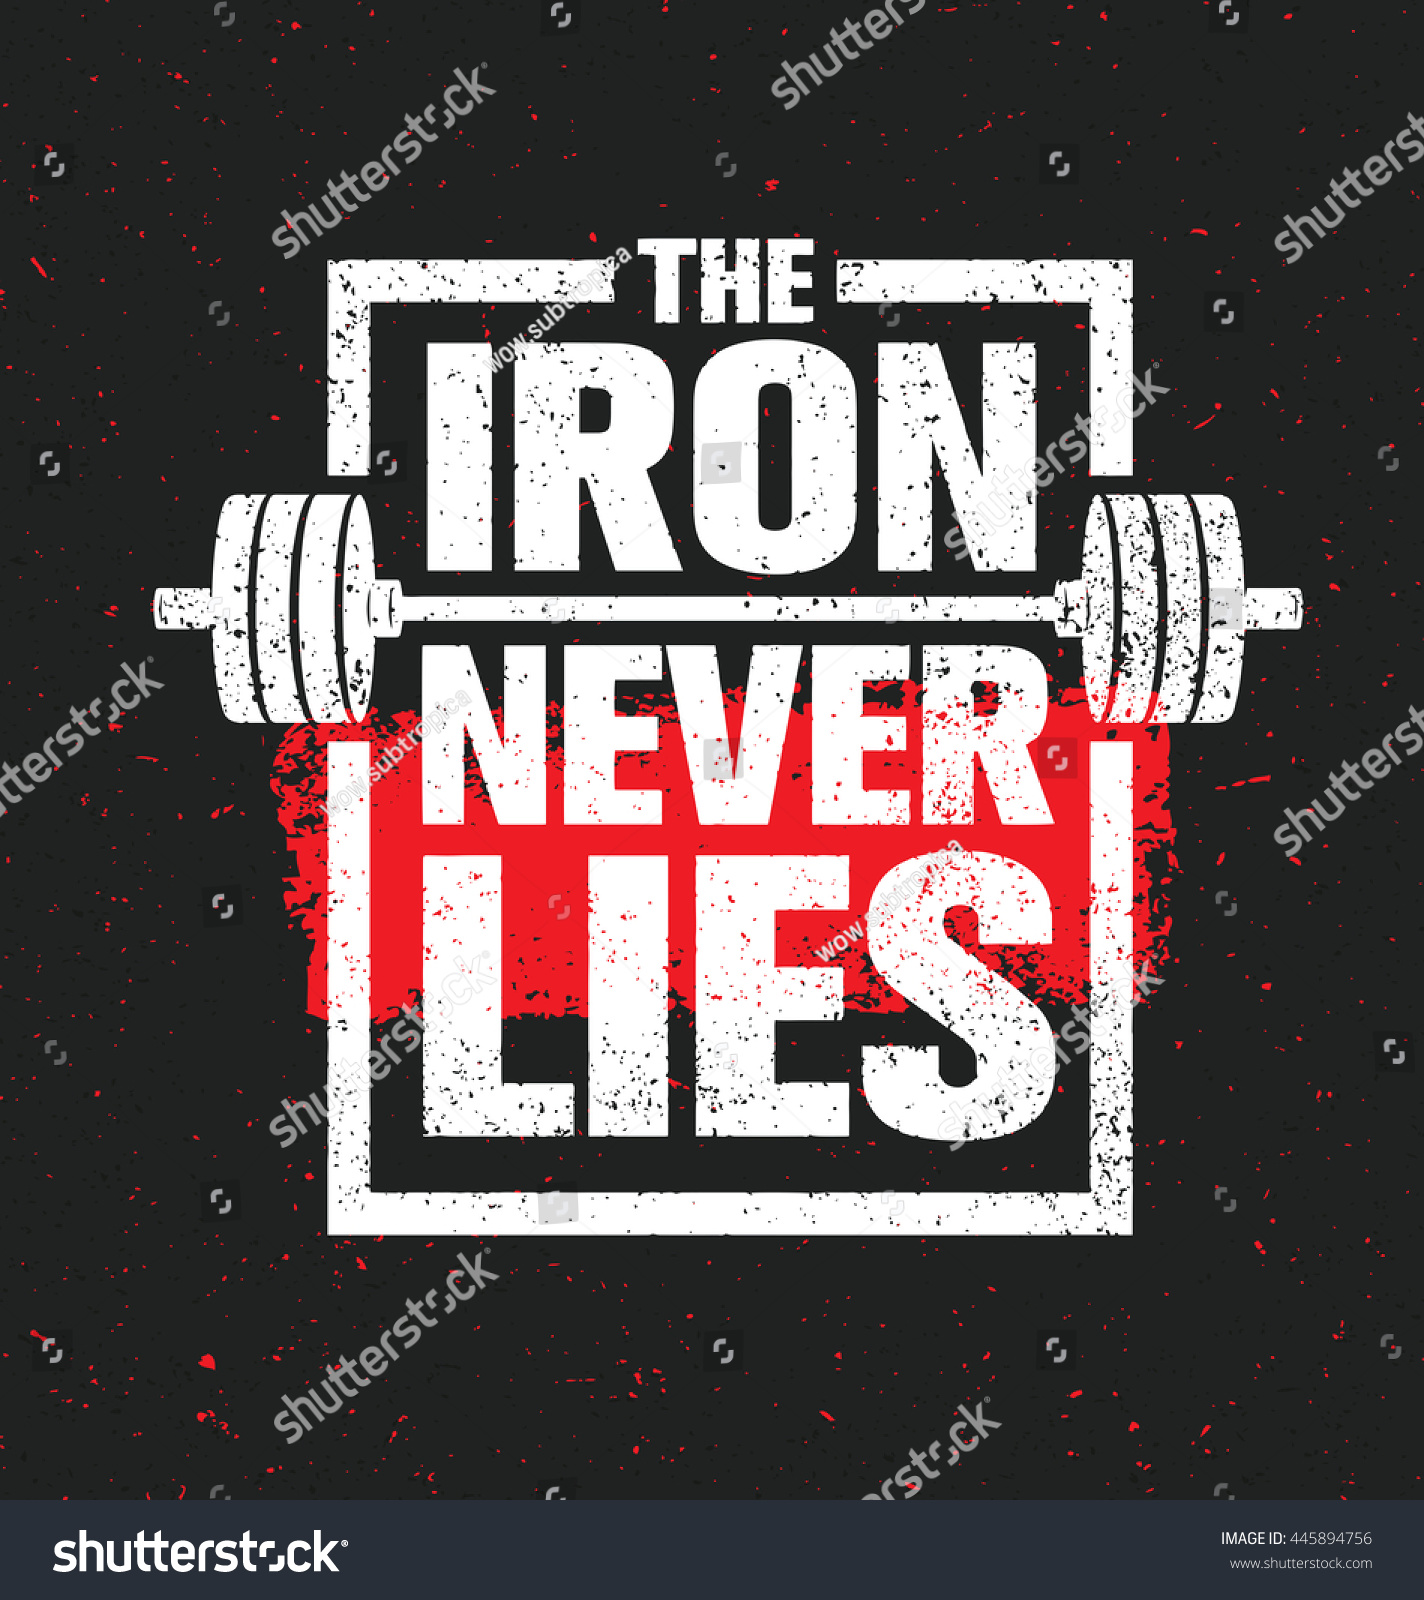 stock-vector-the-iron-never-lies-workout-and-fitness-gym-design-element-concept-creative-sport-custom-vector-445894756.jpg